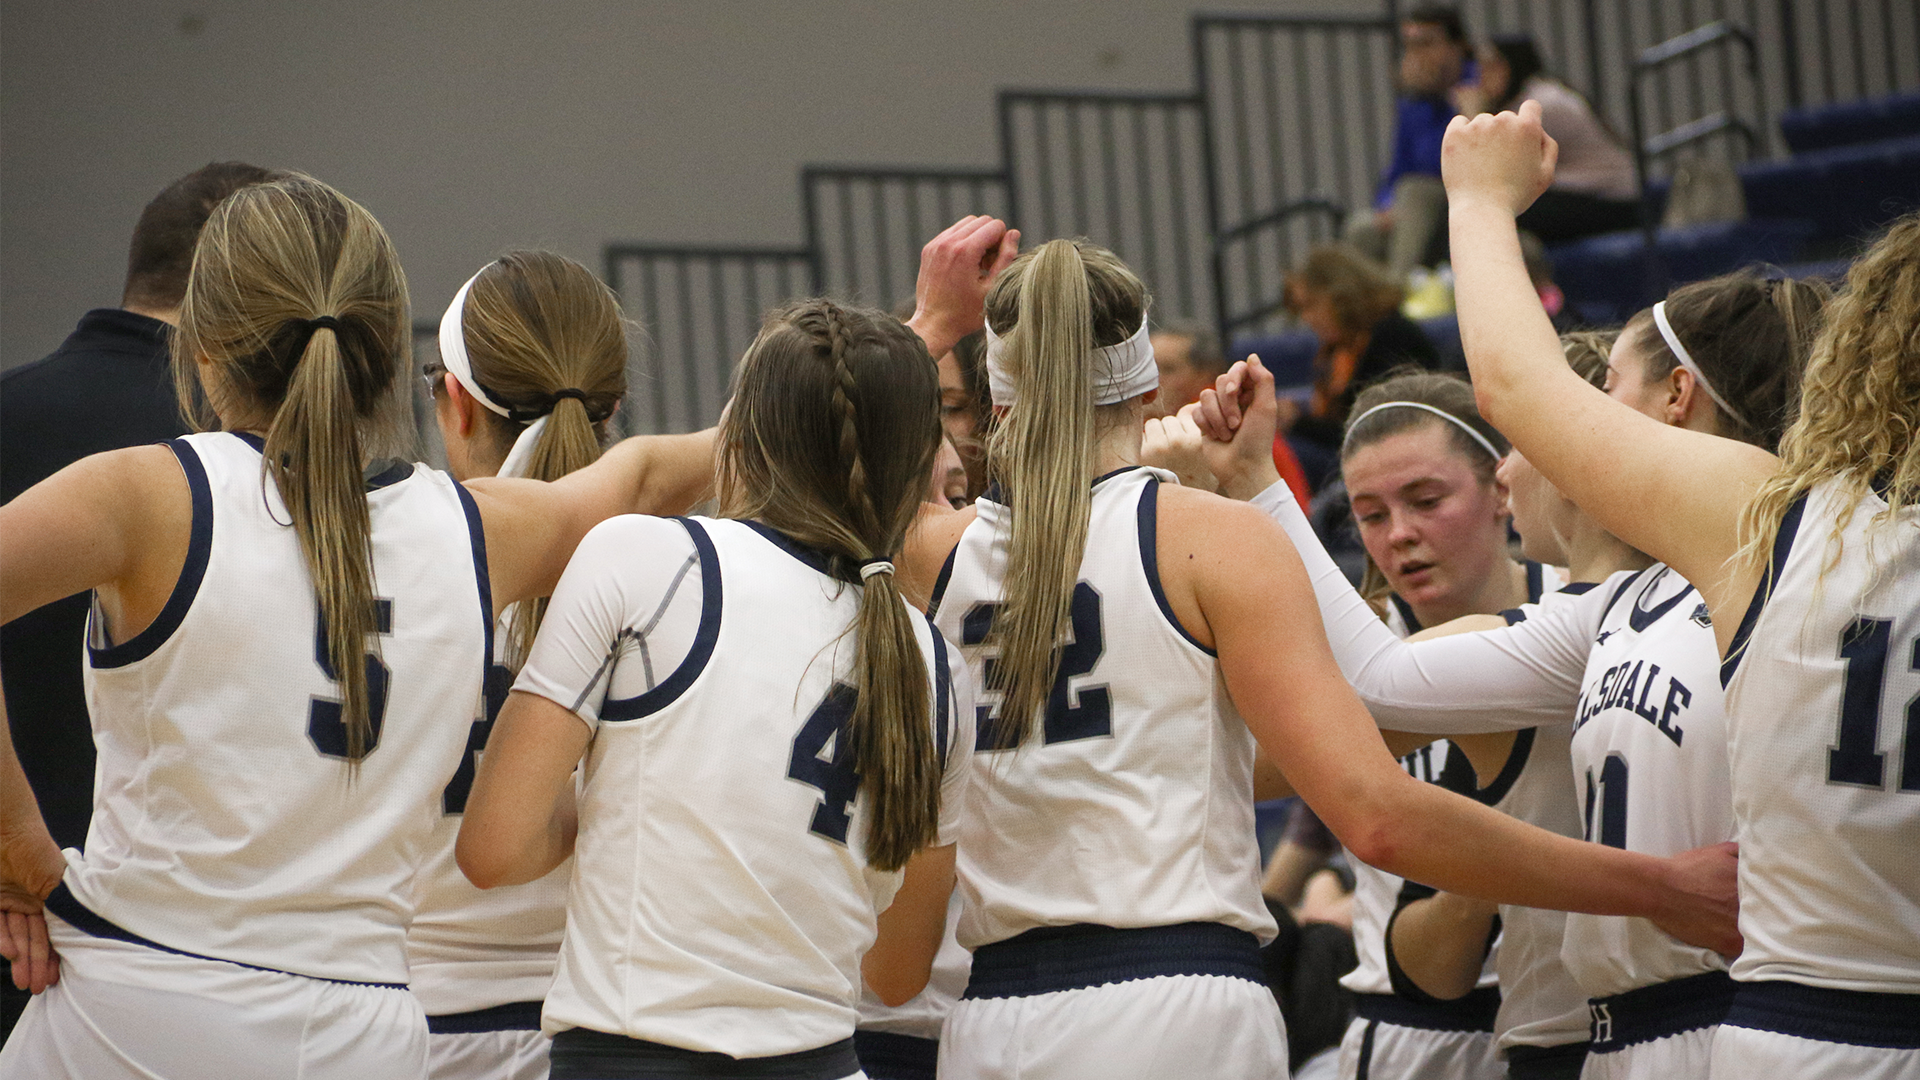 Chargers' Thursday, Feb. 17 home game vs Ursuline postponed due to weather